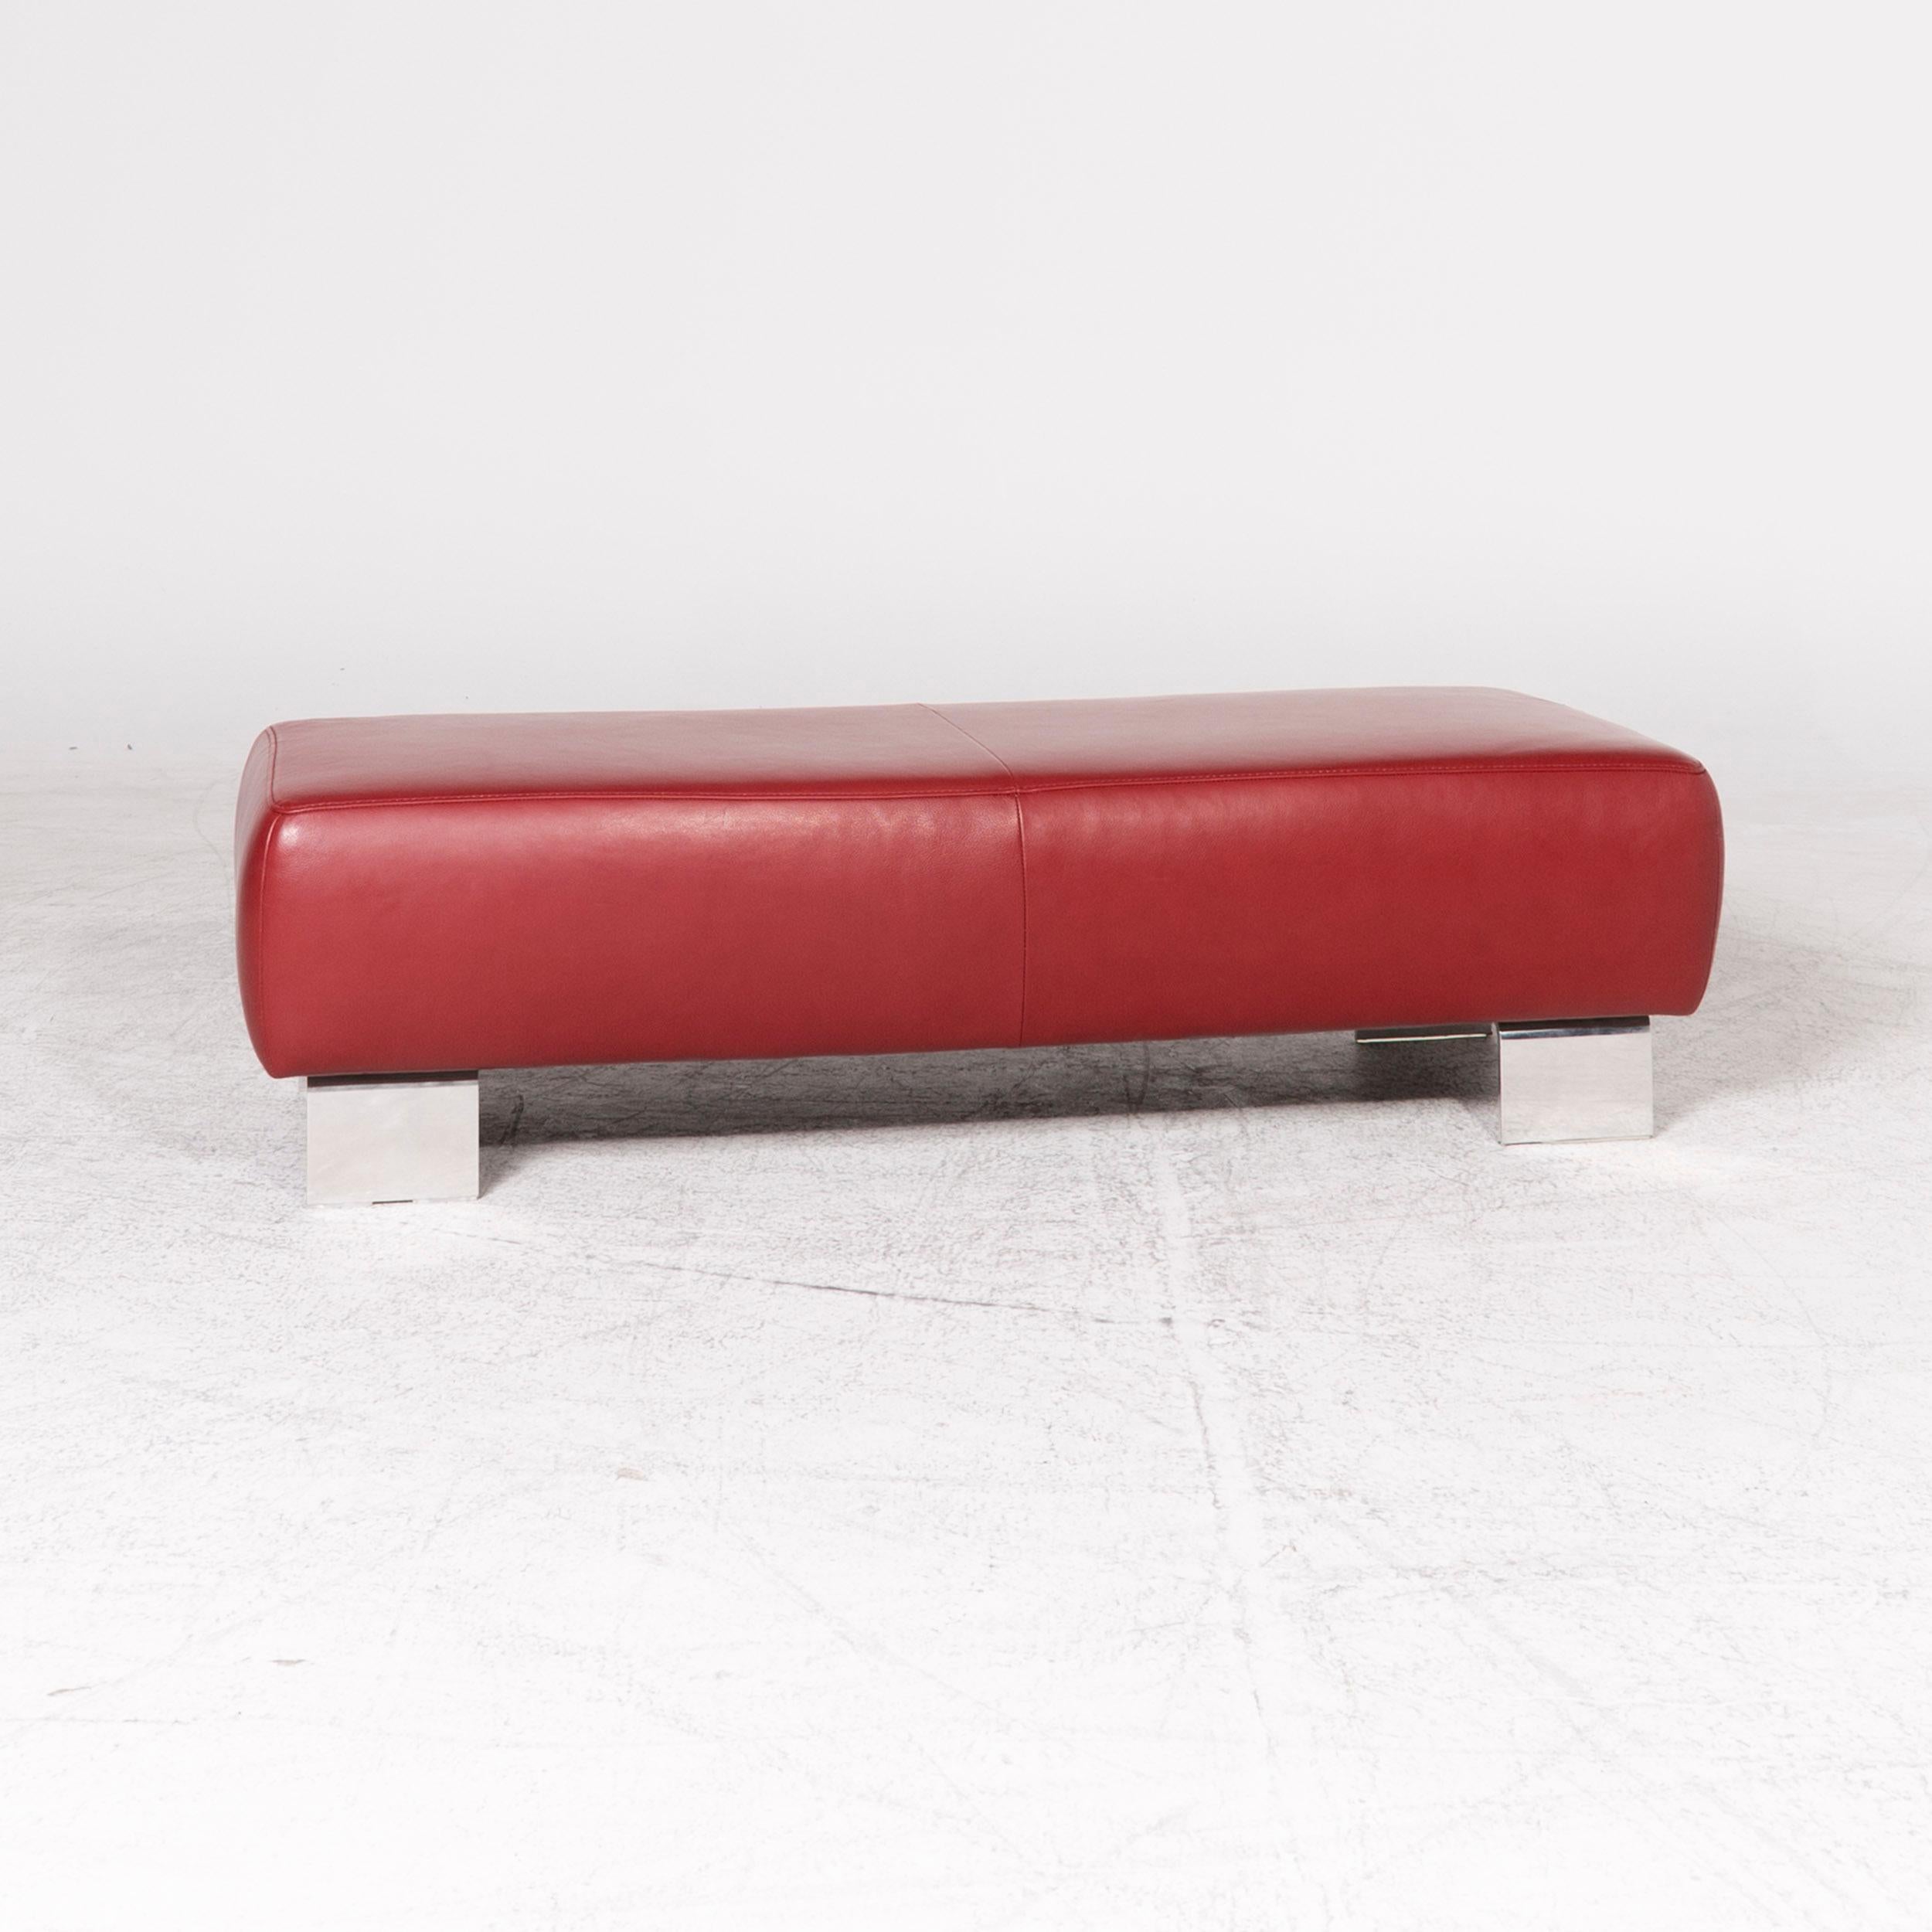 Modern Willi Schillig Taboo Designer Leather Stool Red Genuine Leather Stool For Sale